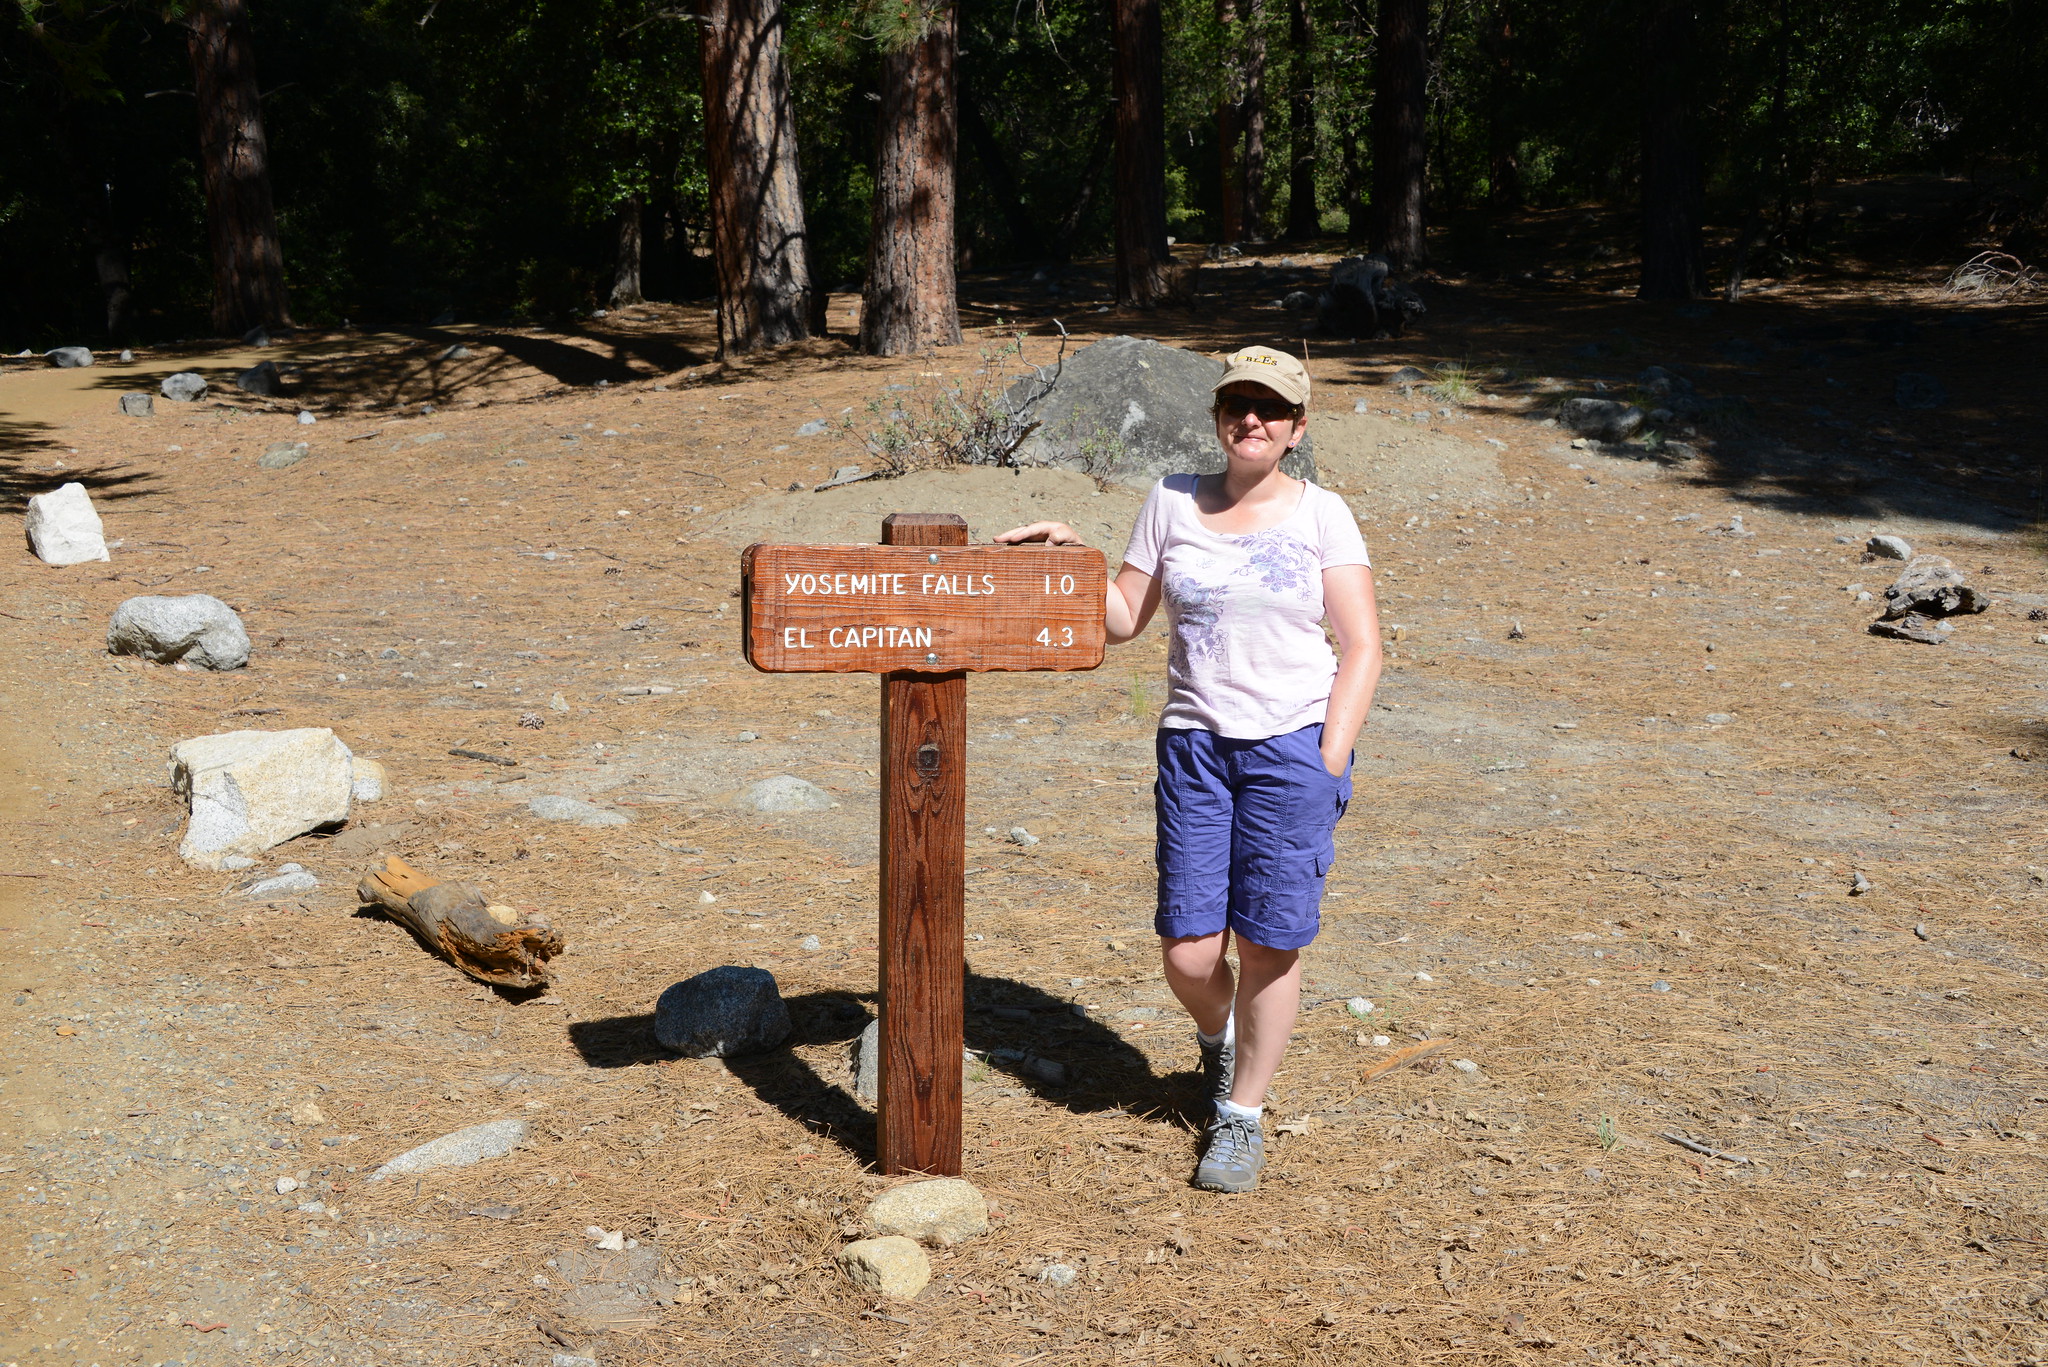 At the start of the Lower Yosemite Falls trail